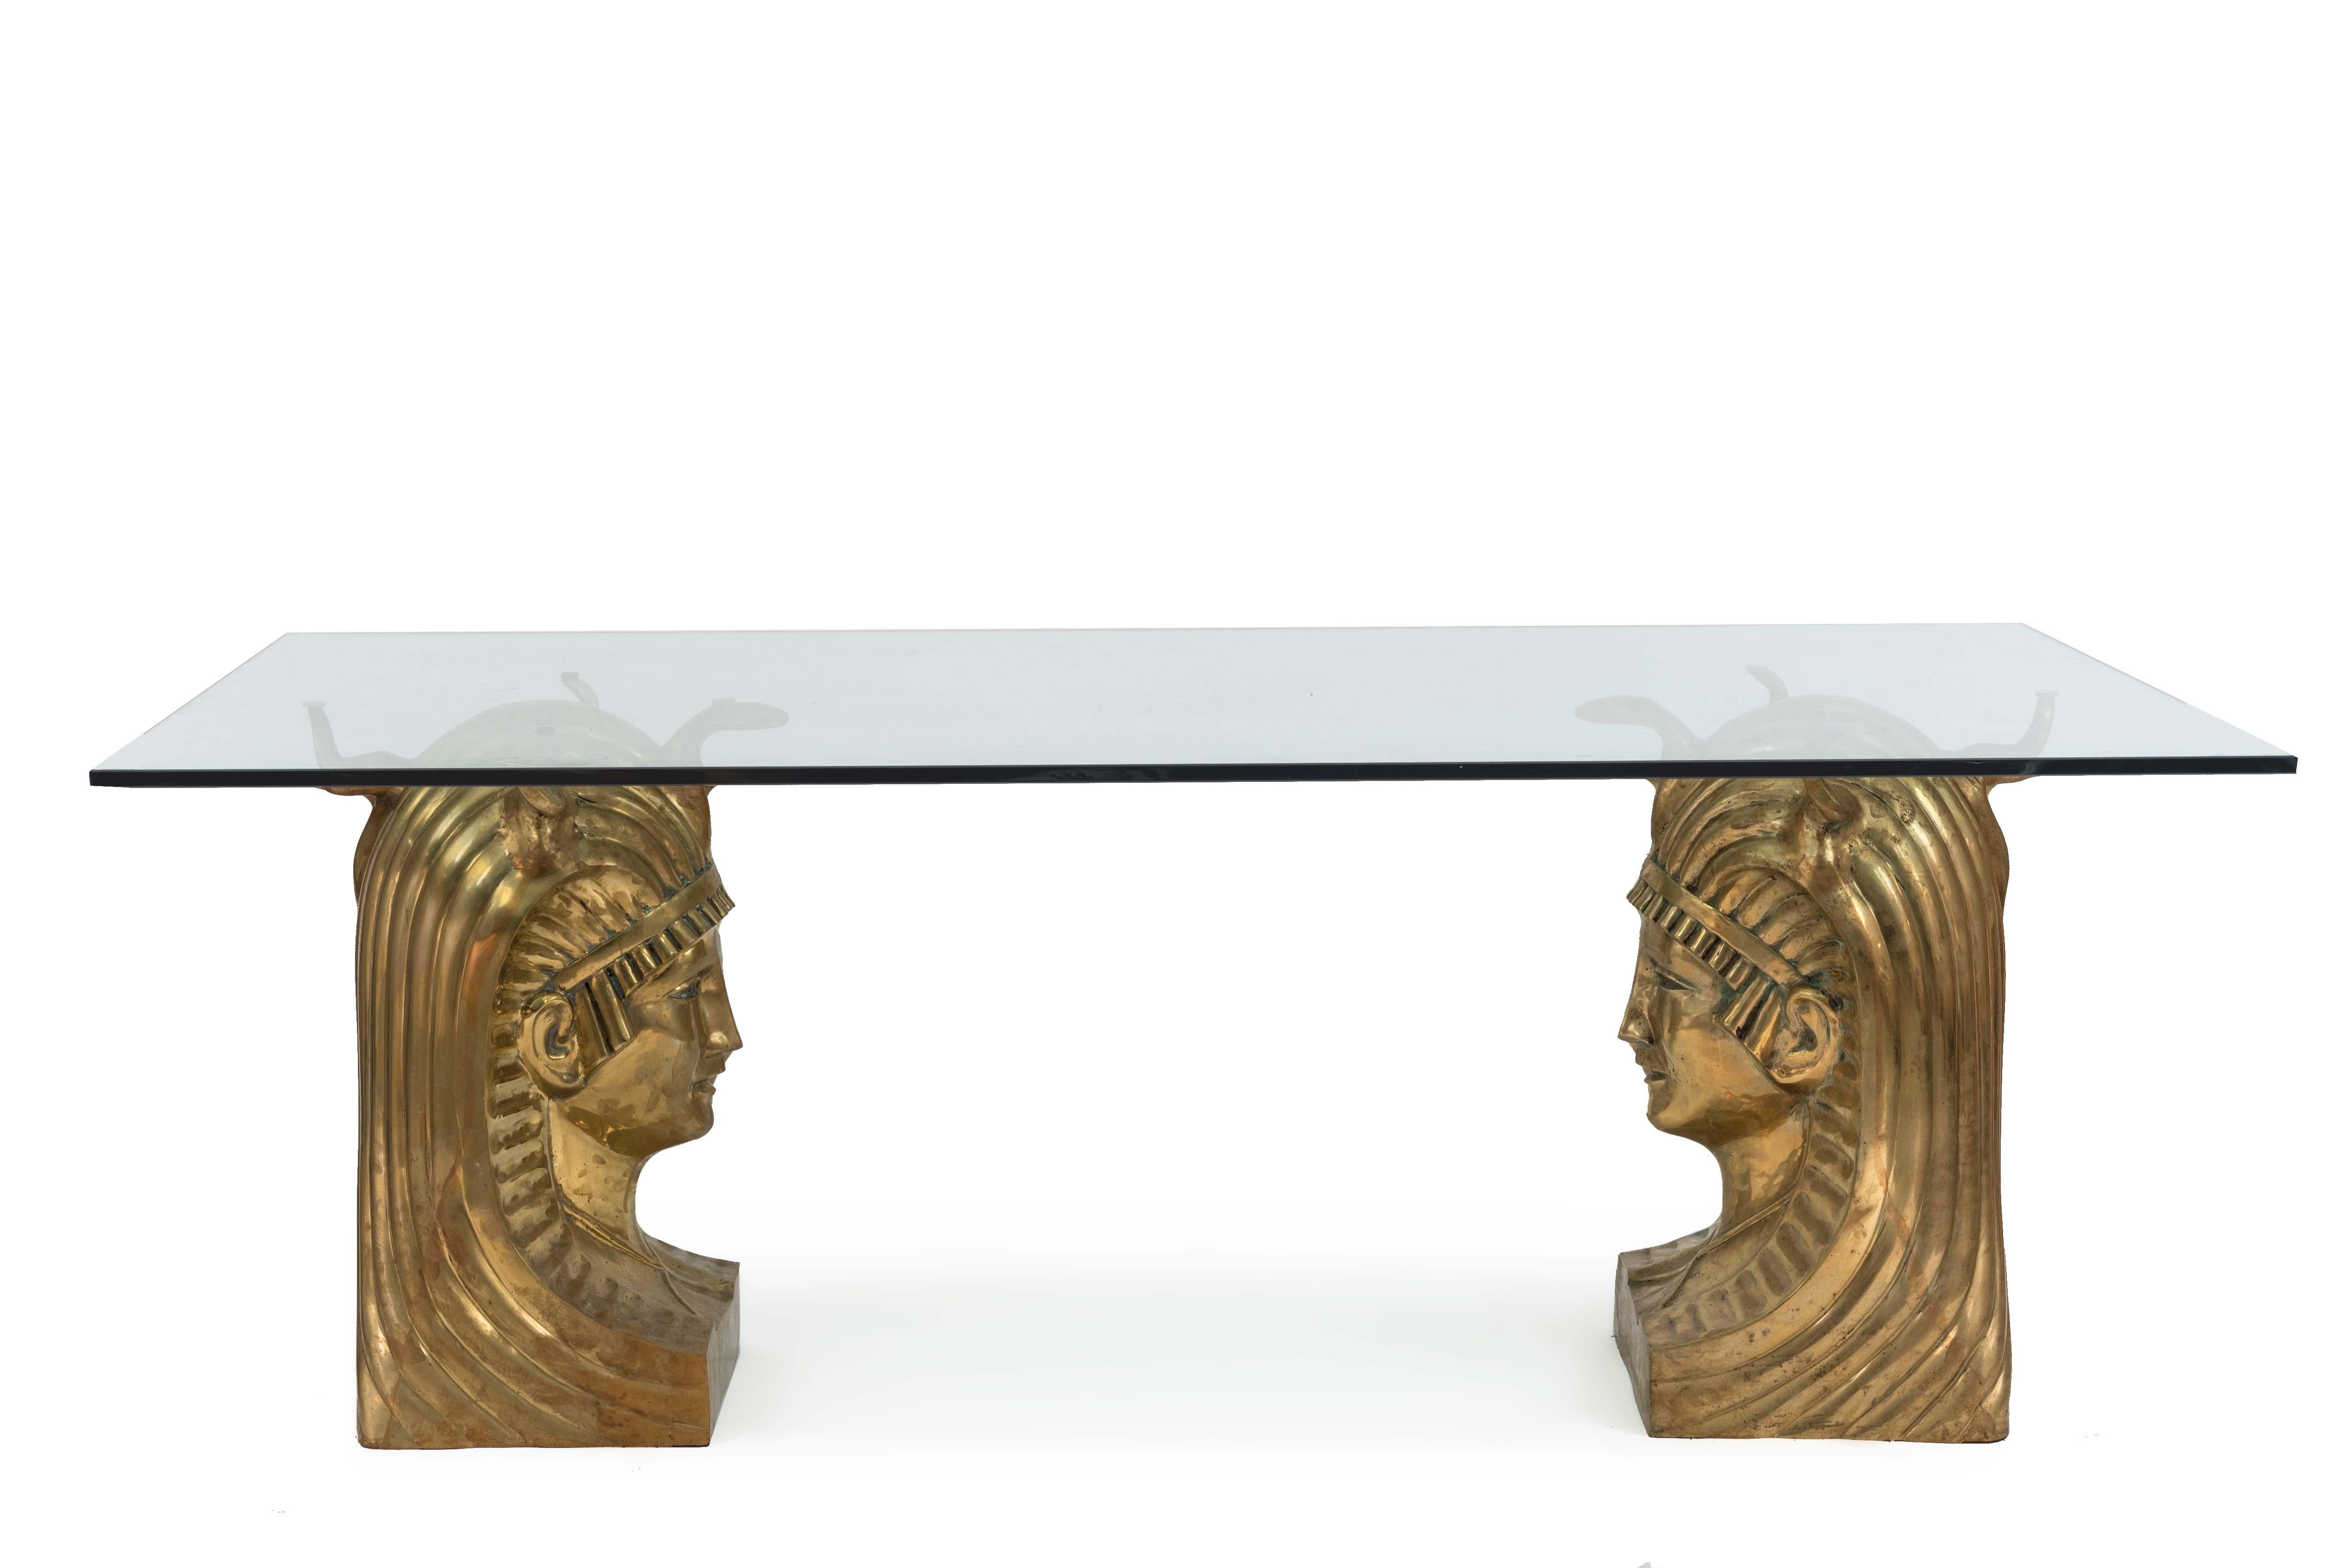 Midcentury American (1970s) dining table having a rectangular glass top supported by a pair of large bronze busts of a Pharaoh wearing a headdress.